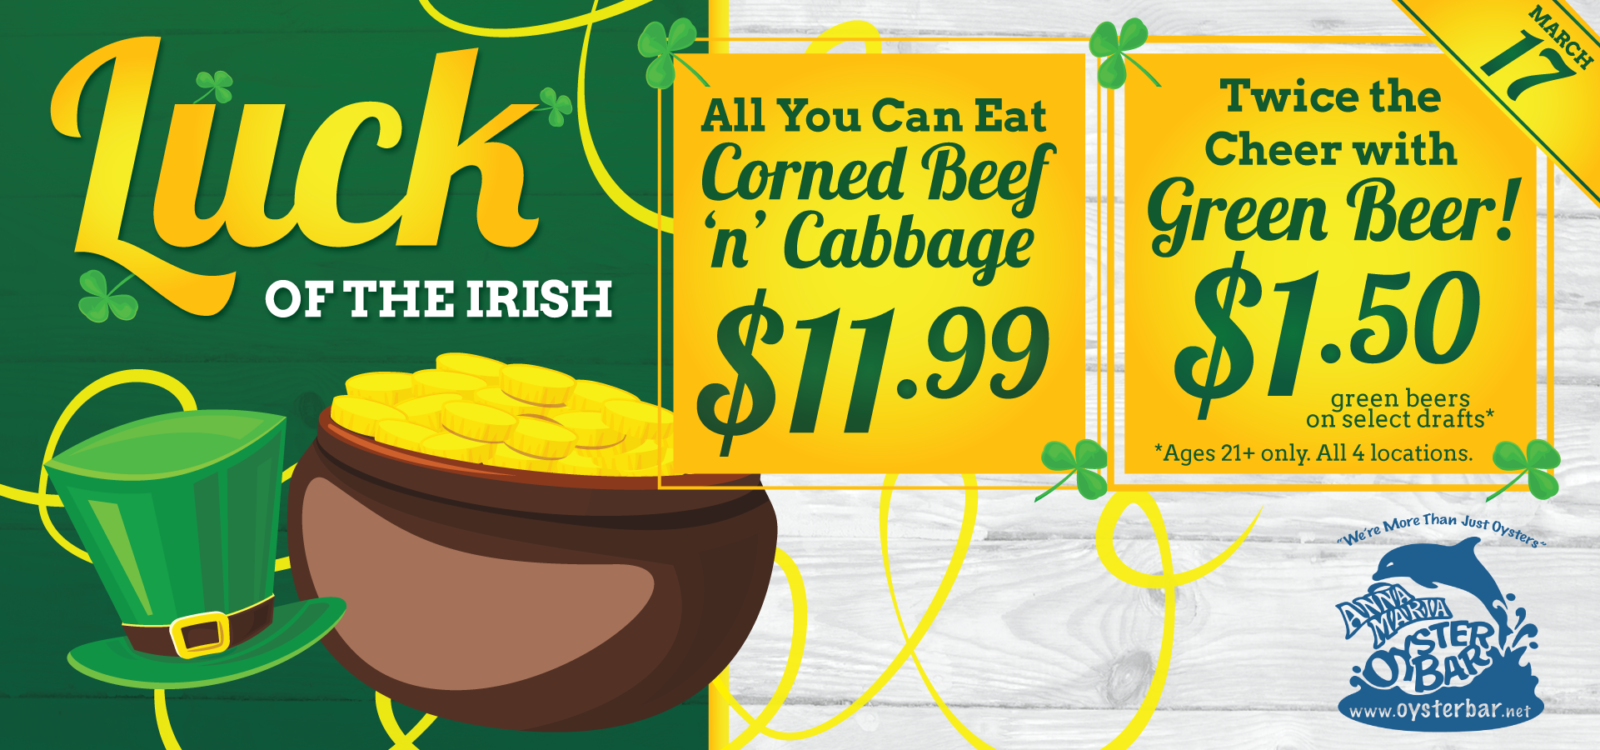 All you Can Eat | Corned Beef n' Cabbage